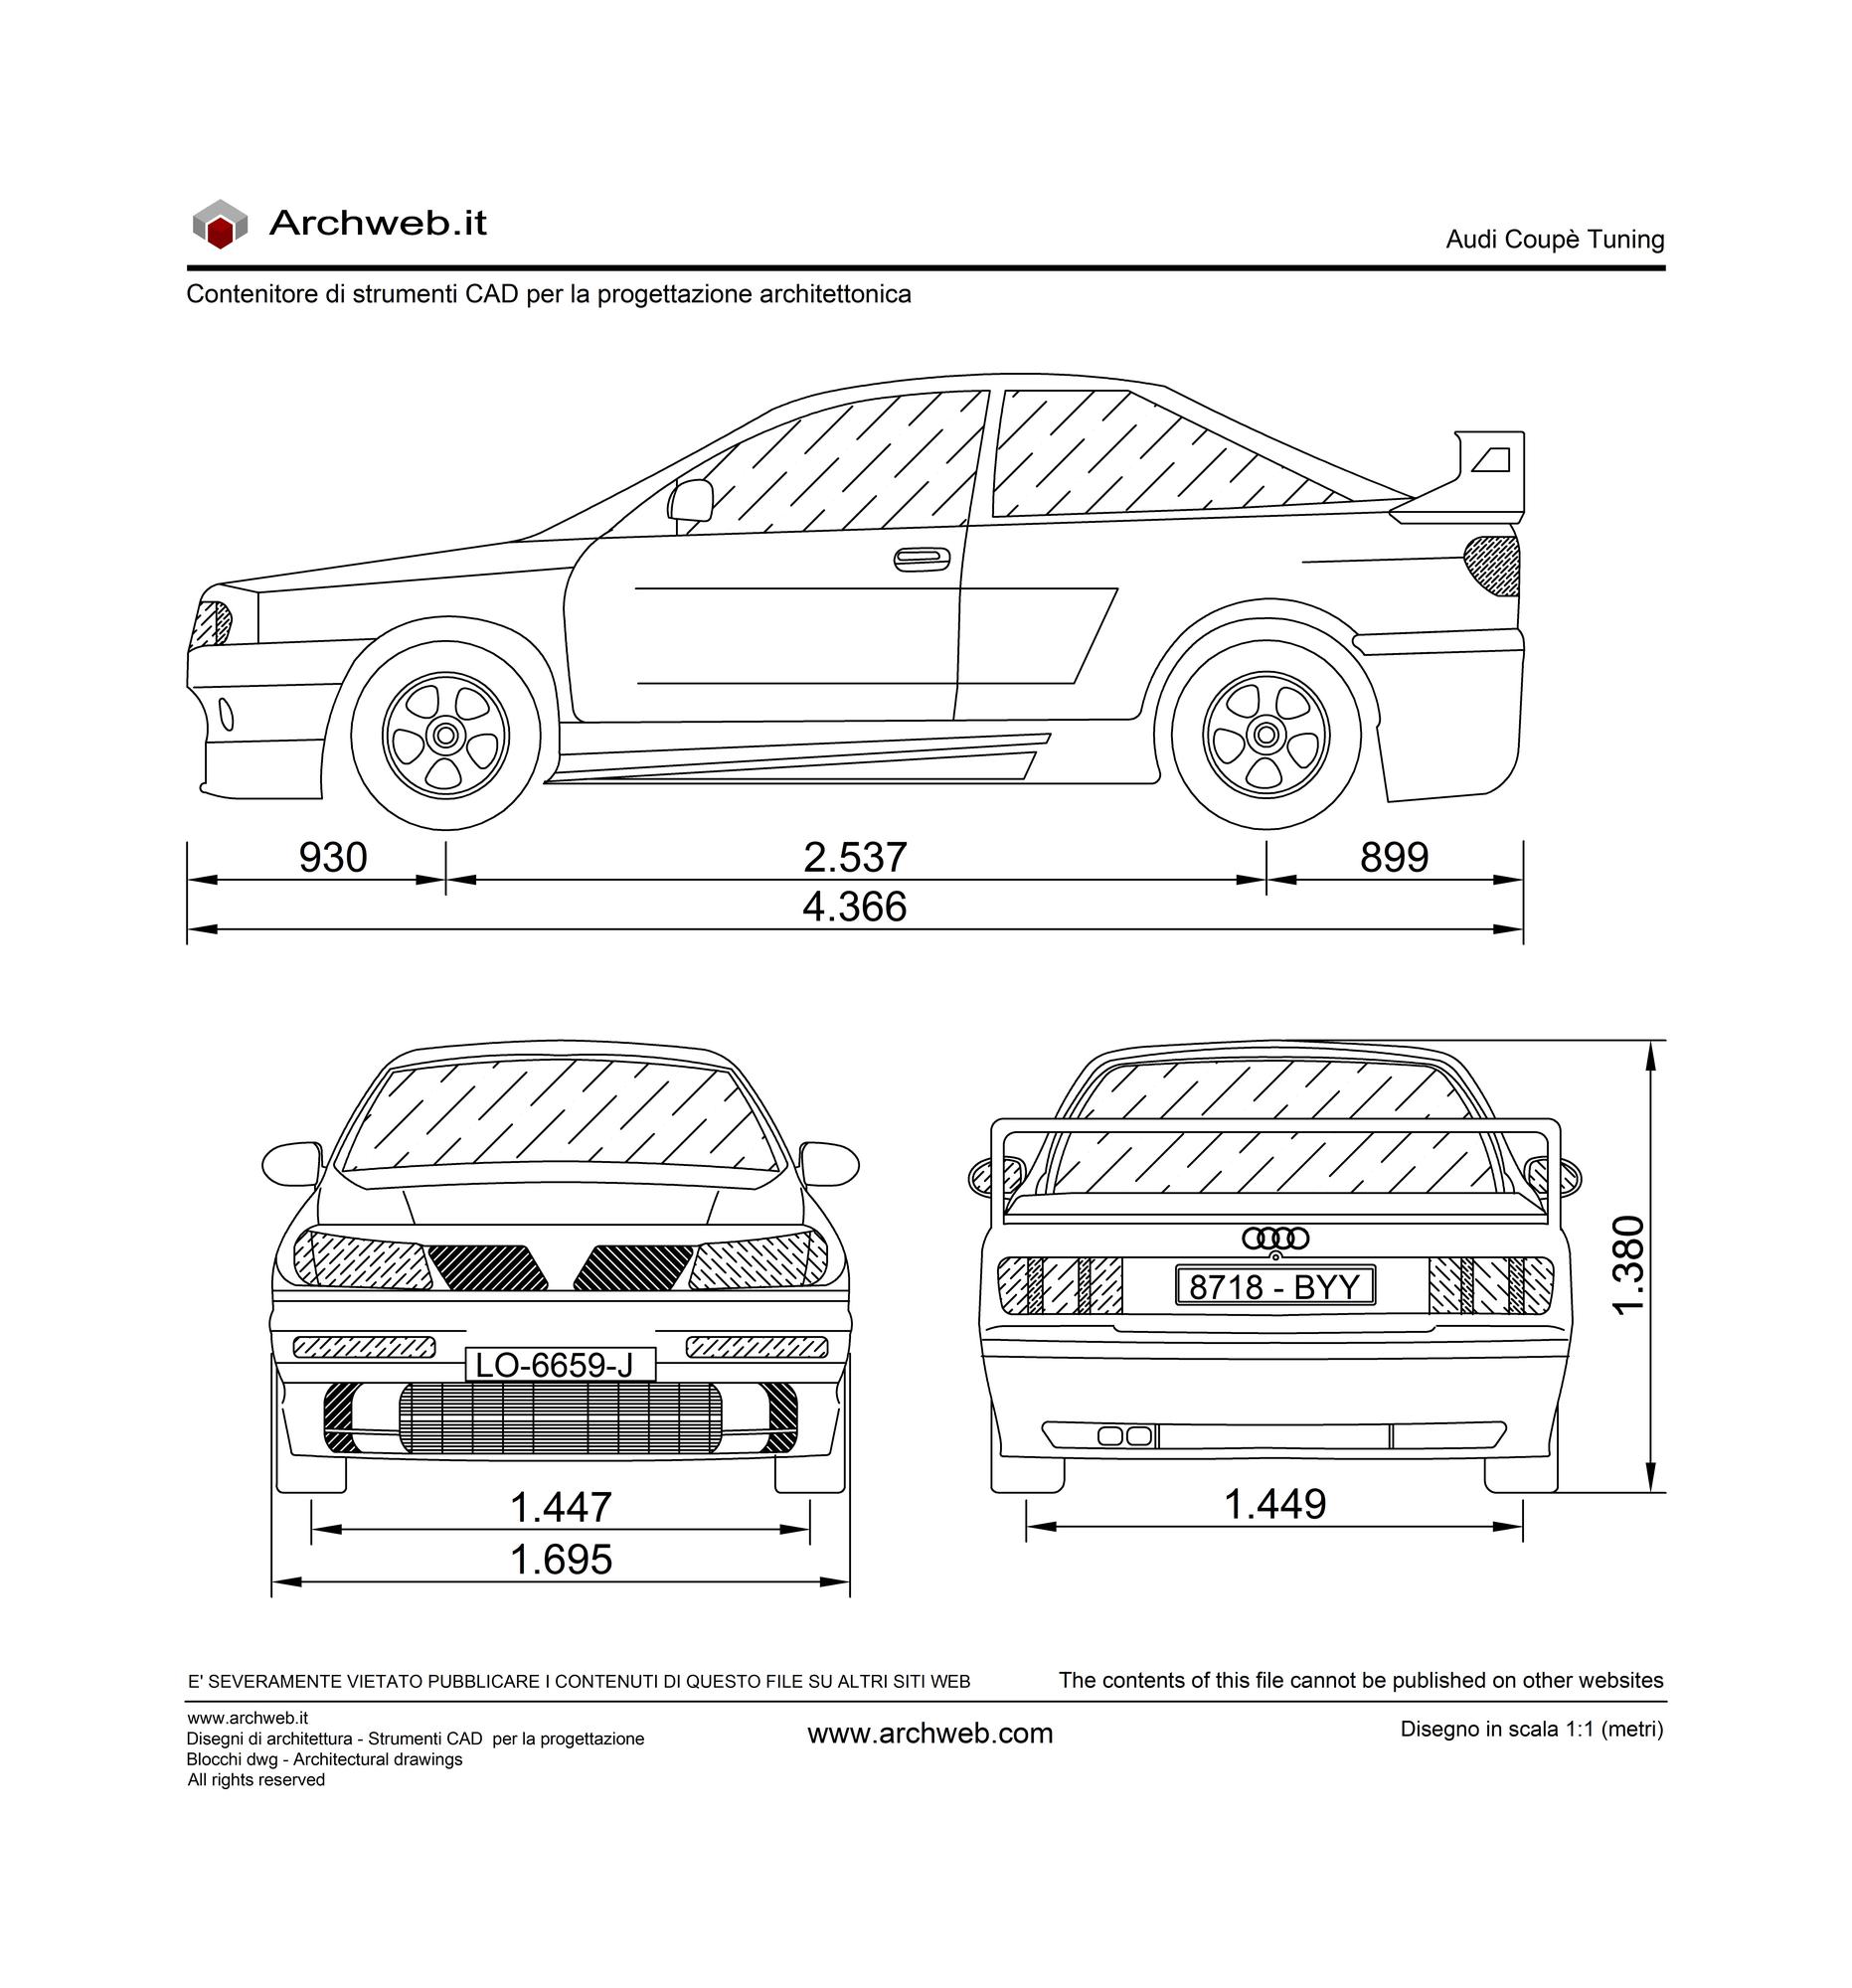 Audi Coupe Tuning dwg